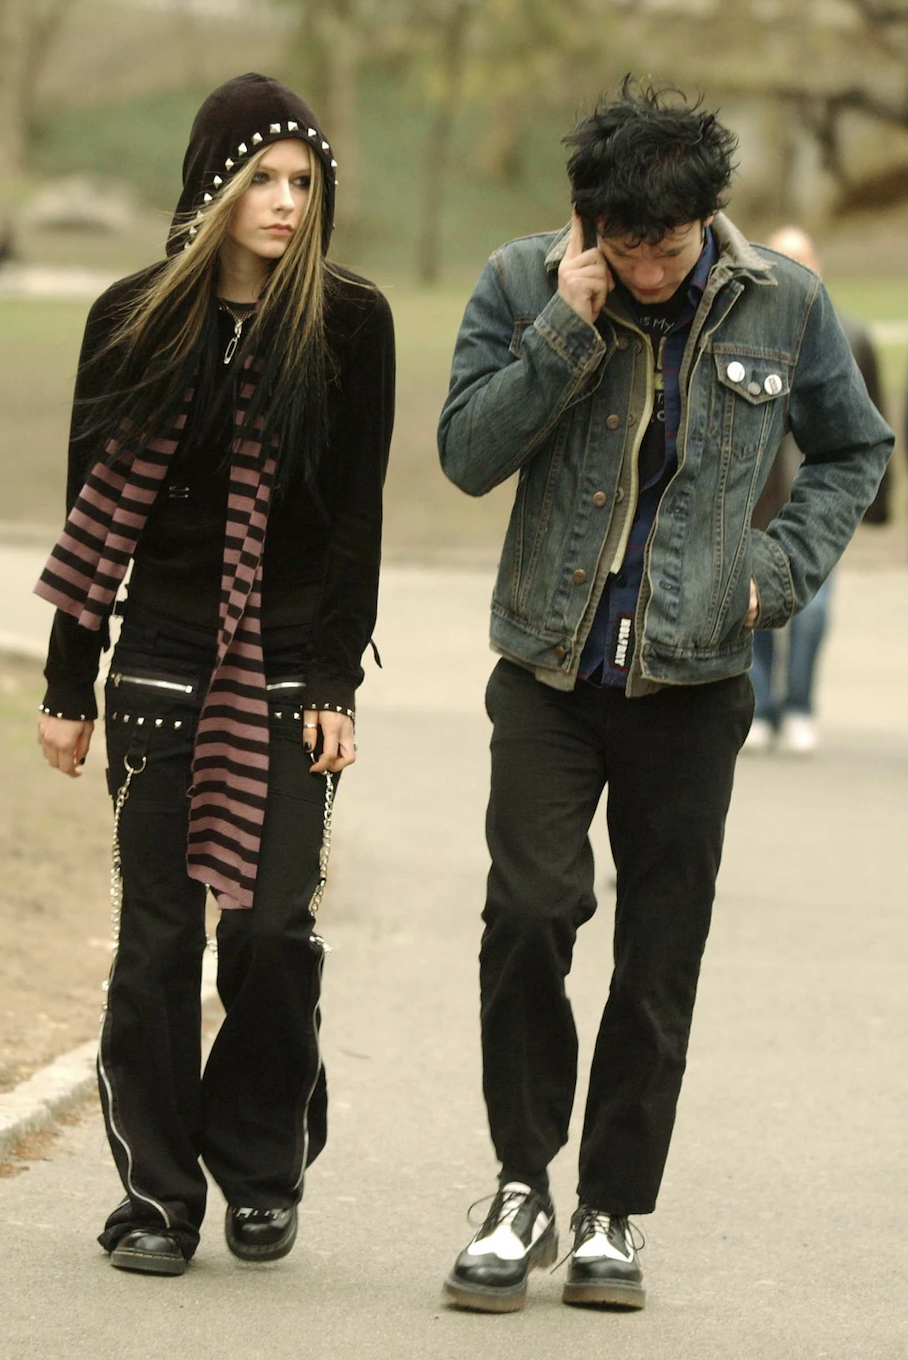 Avril Lavigne and Deryck Whibley walk in the park.